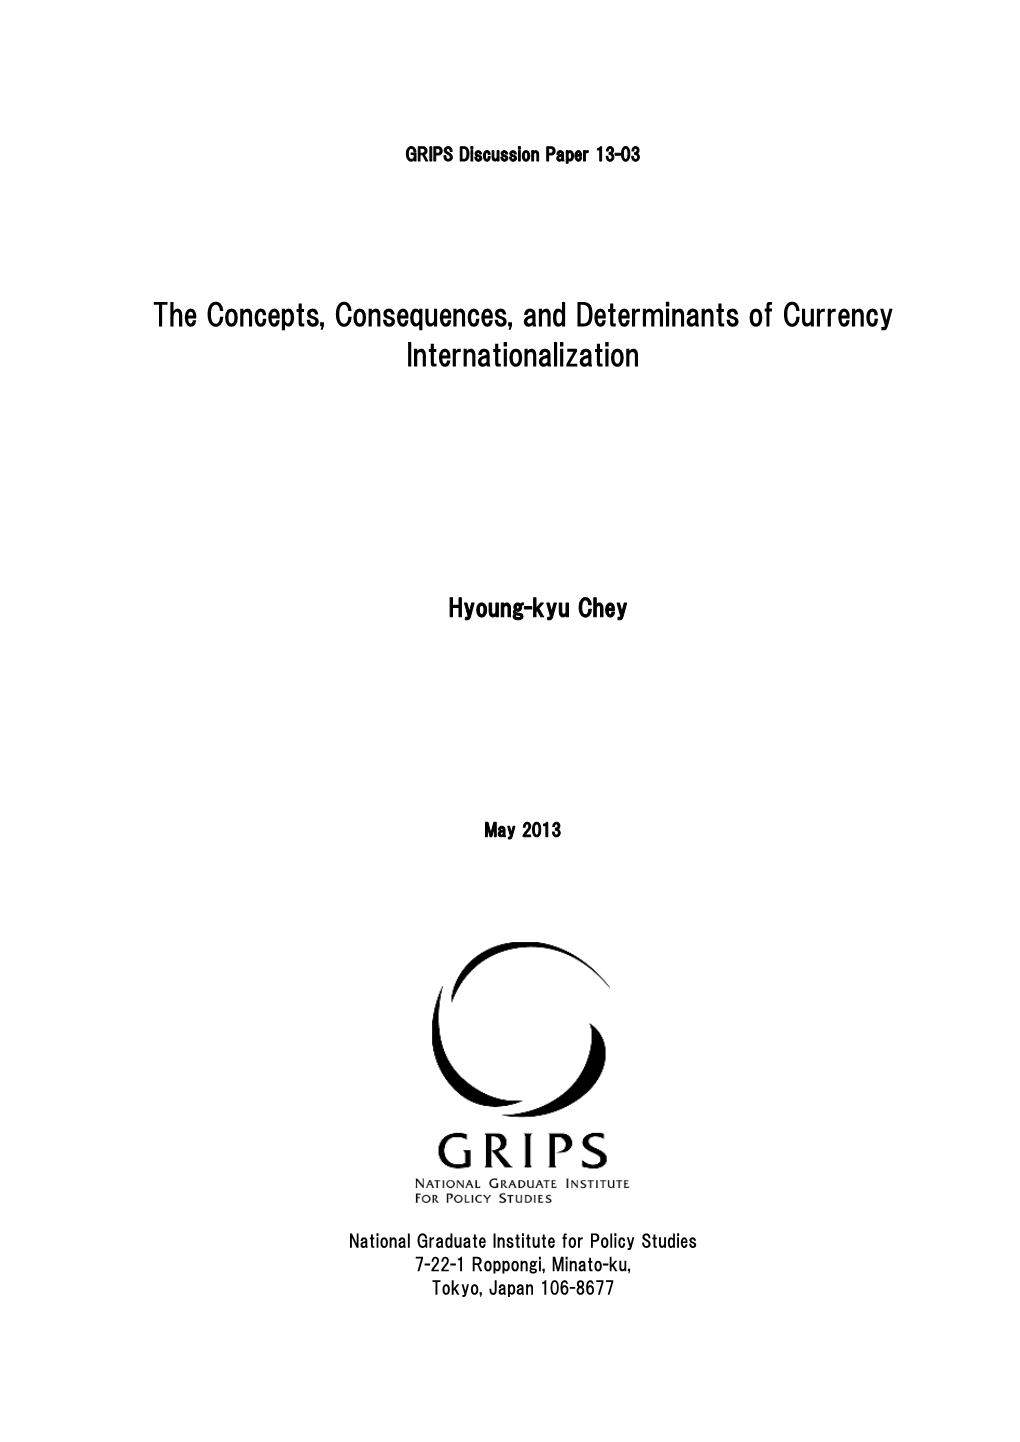 The Concepts, Consequences, and Determinants of Currency Internationalization